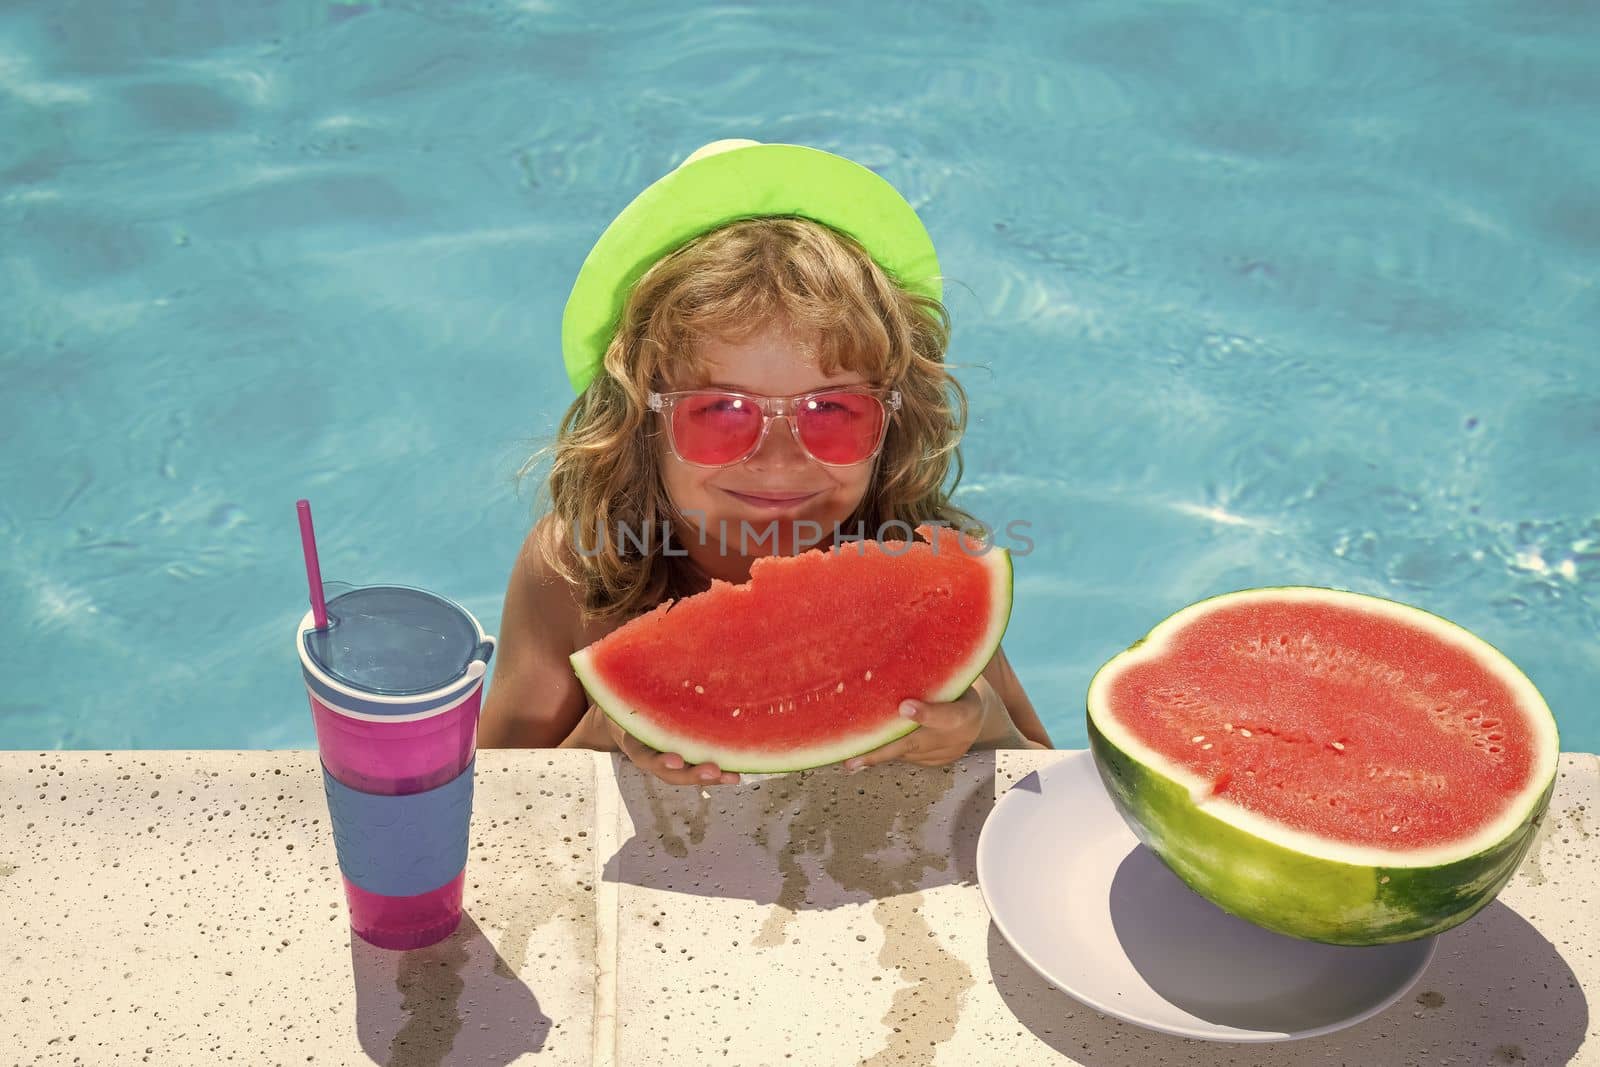 Kid boy eat watermelon in swimming pool. Summer vacation concept. Summer kids portrait with watermelon in pool water. by RedFoxStudio